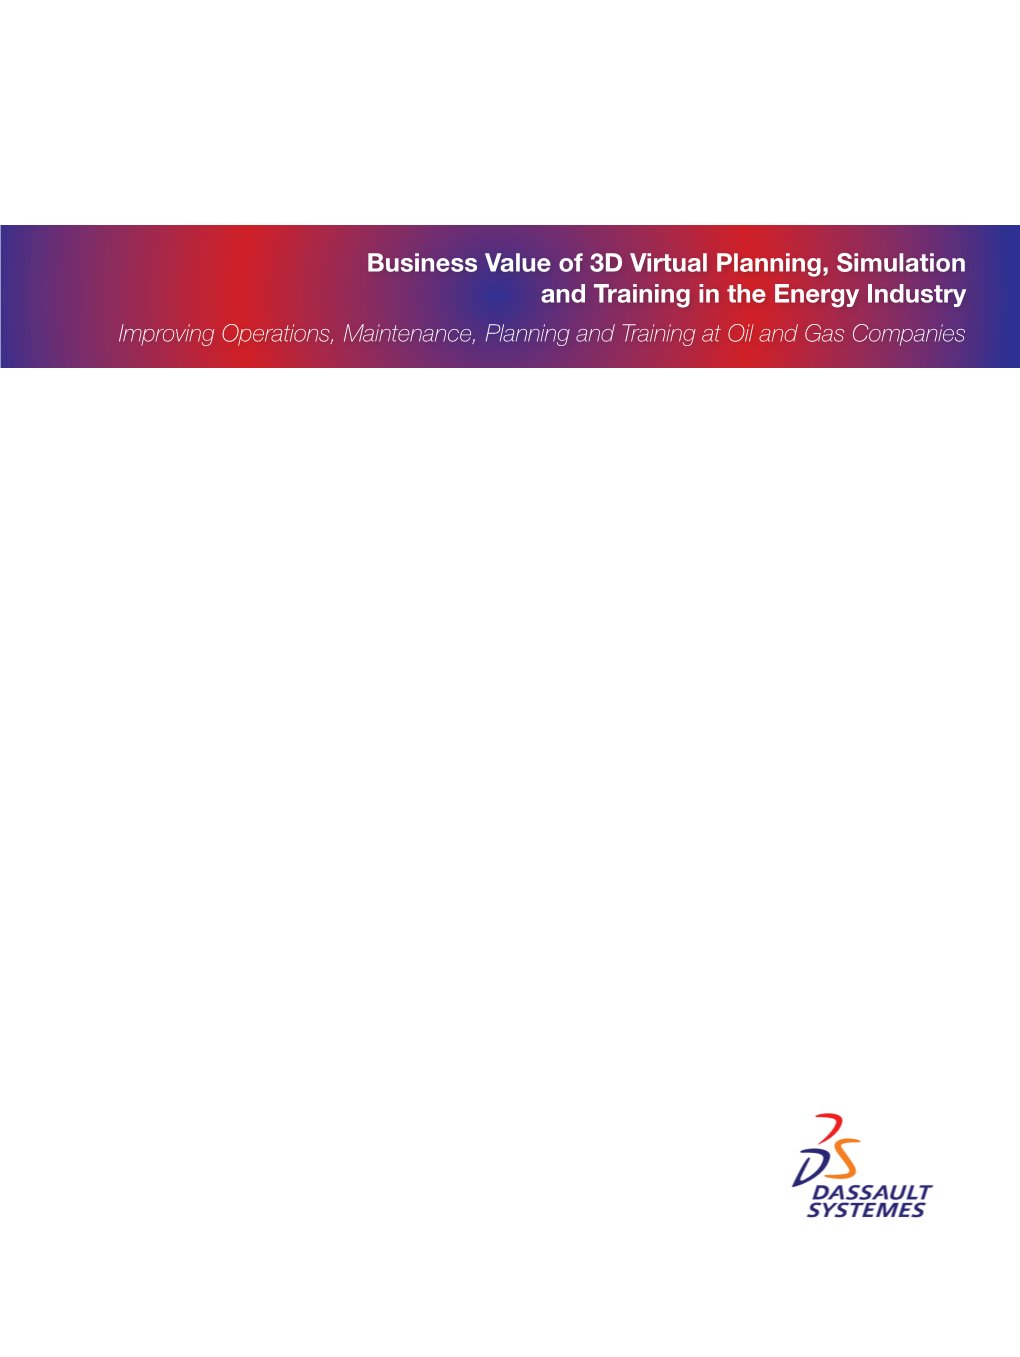 Business Value of 3D Virtual Planning, Simulation and Training in The